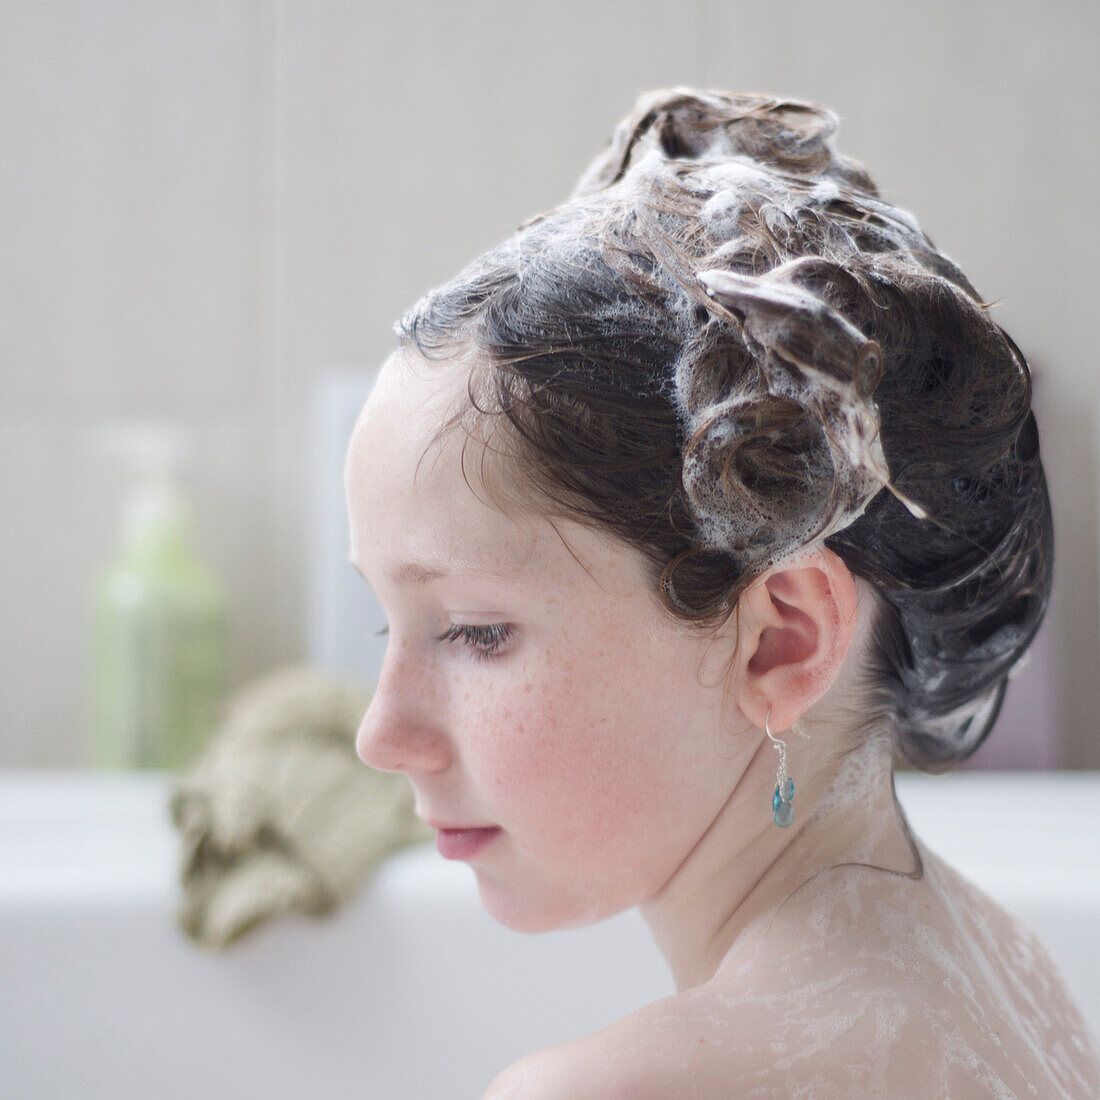 Young Girl with Soapy Hair in Bath